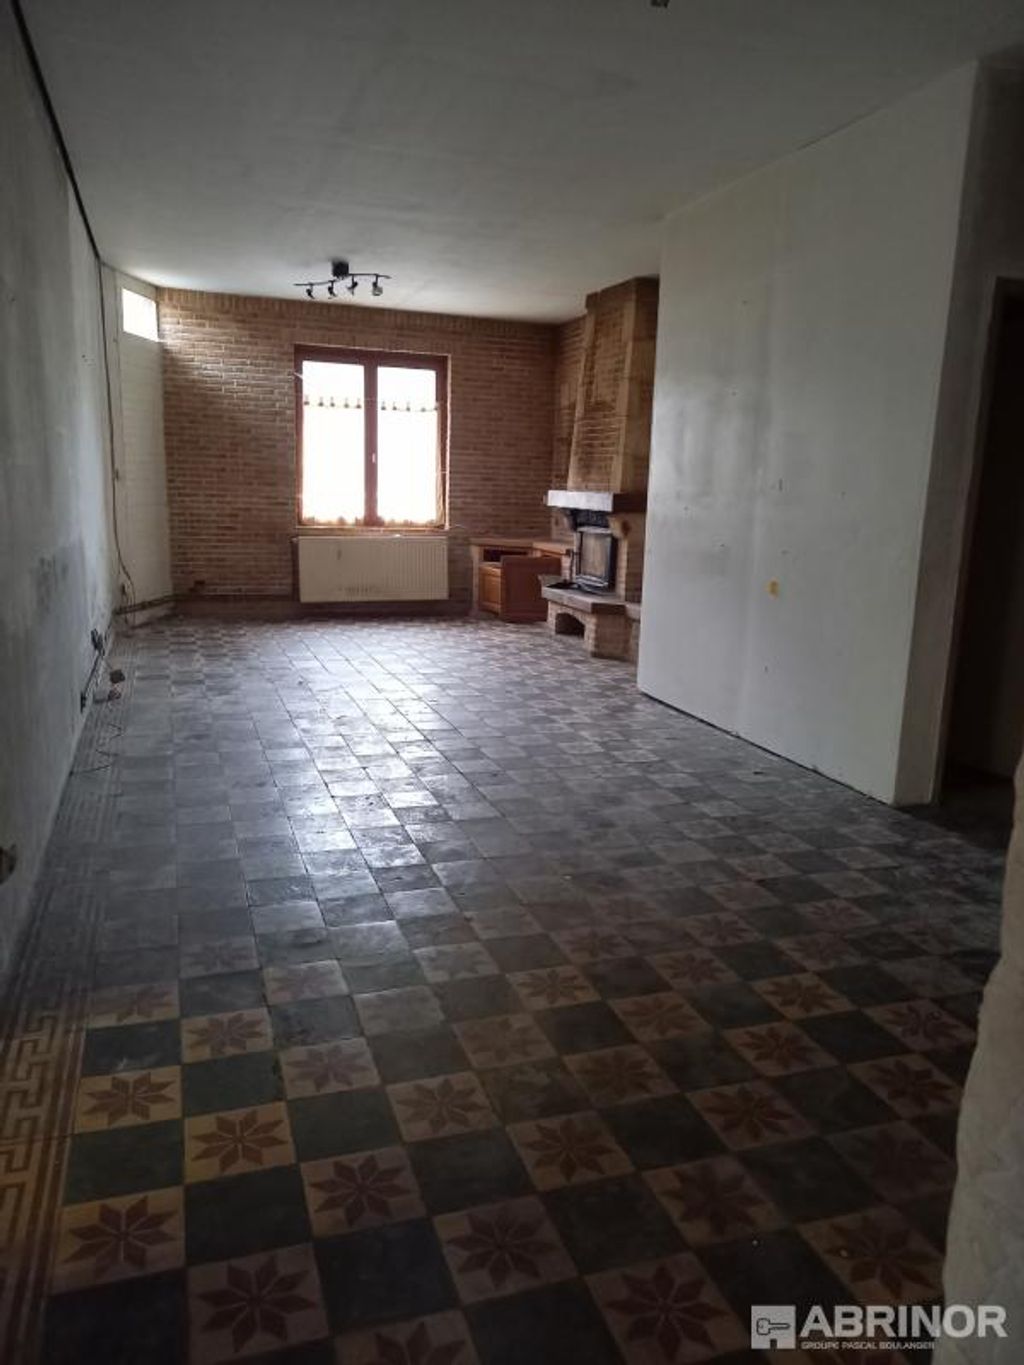 Achat maison 3 chambre(s) - Rieulay